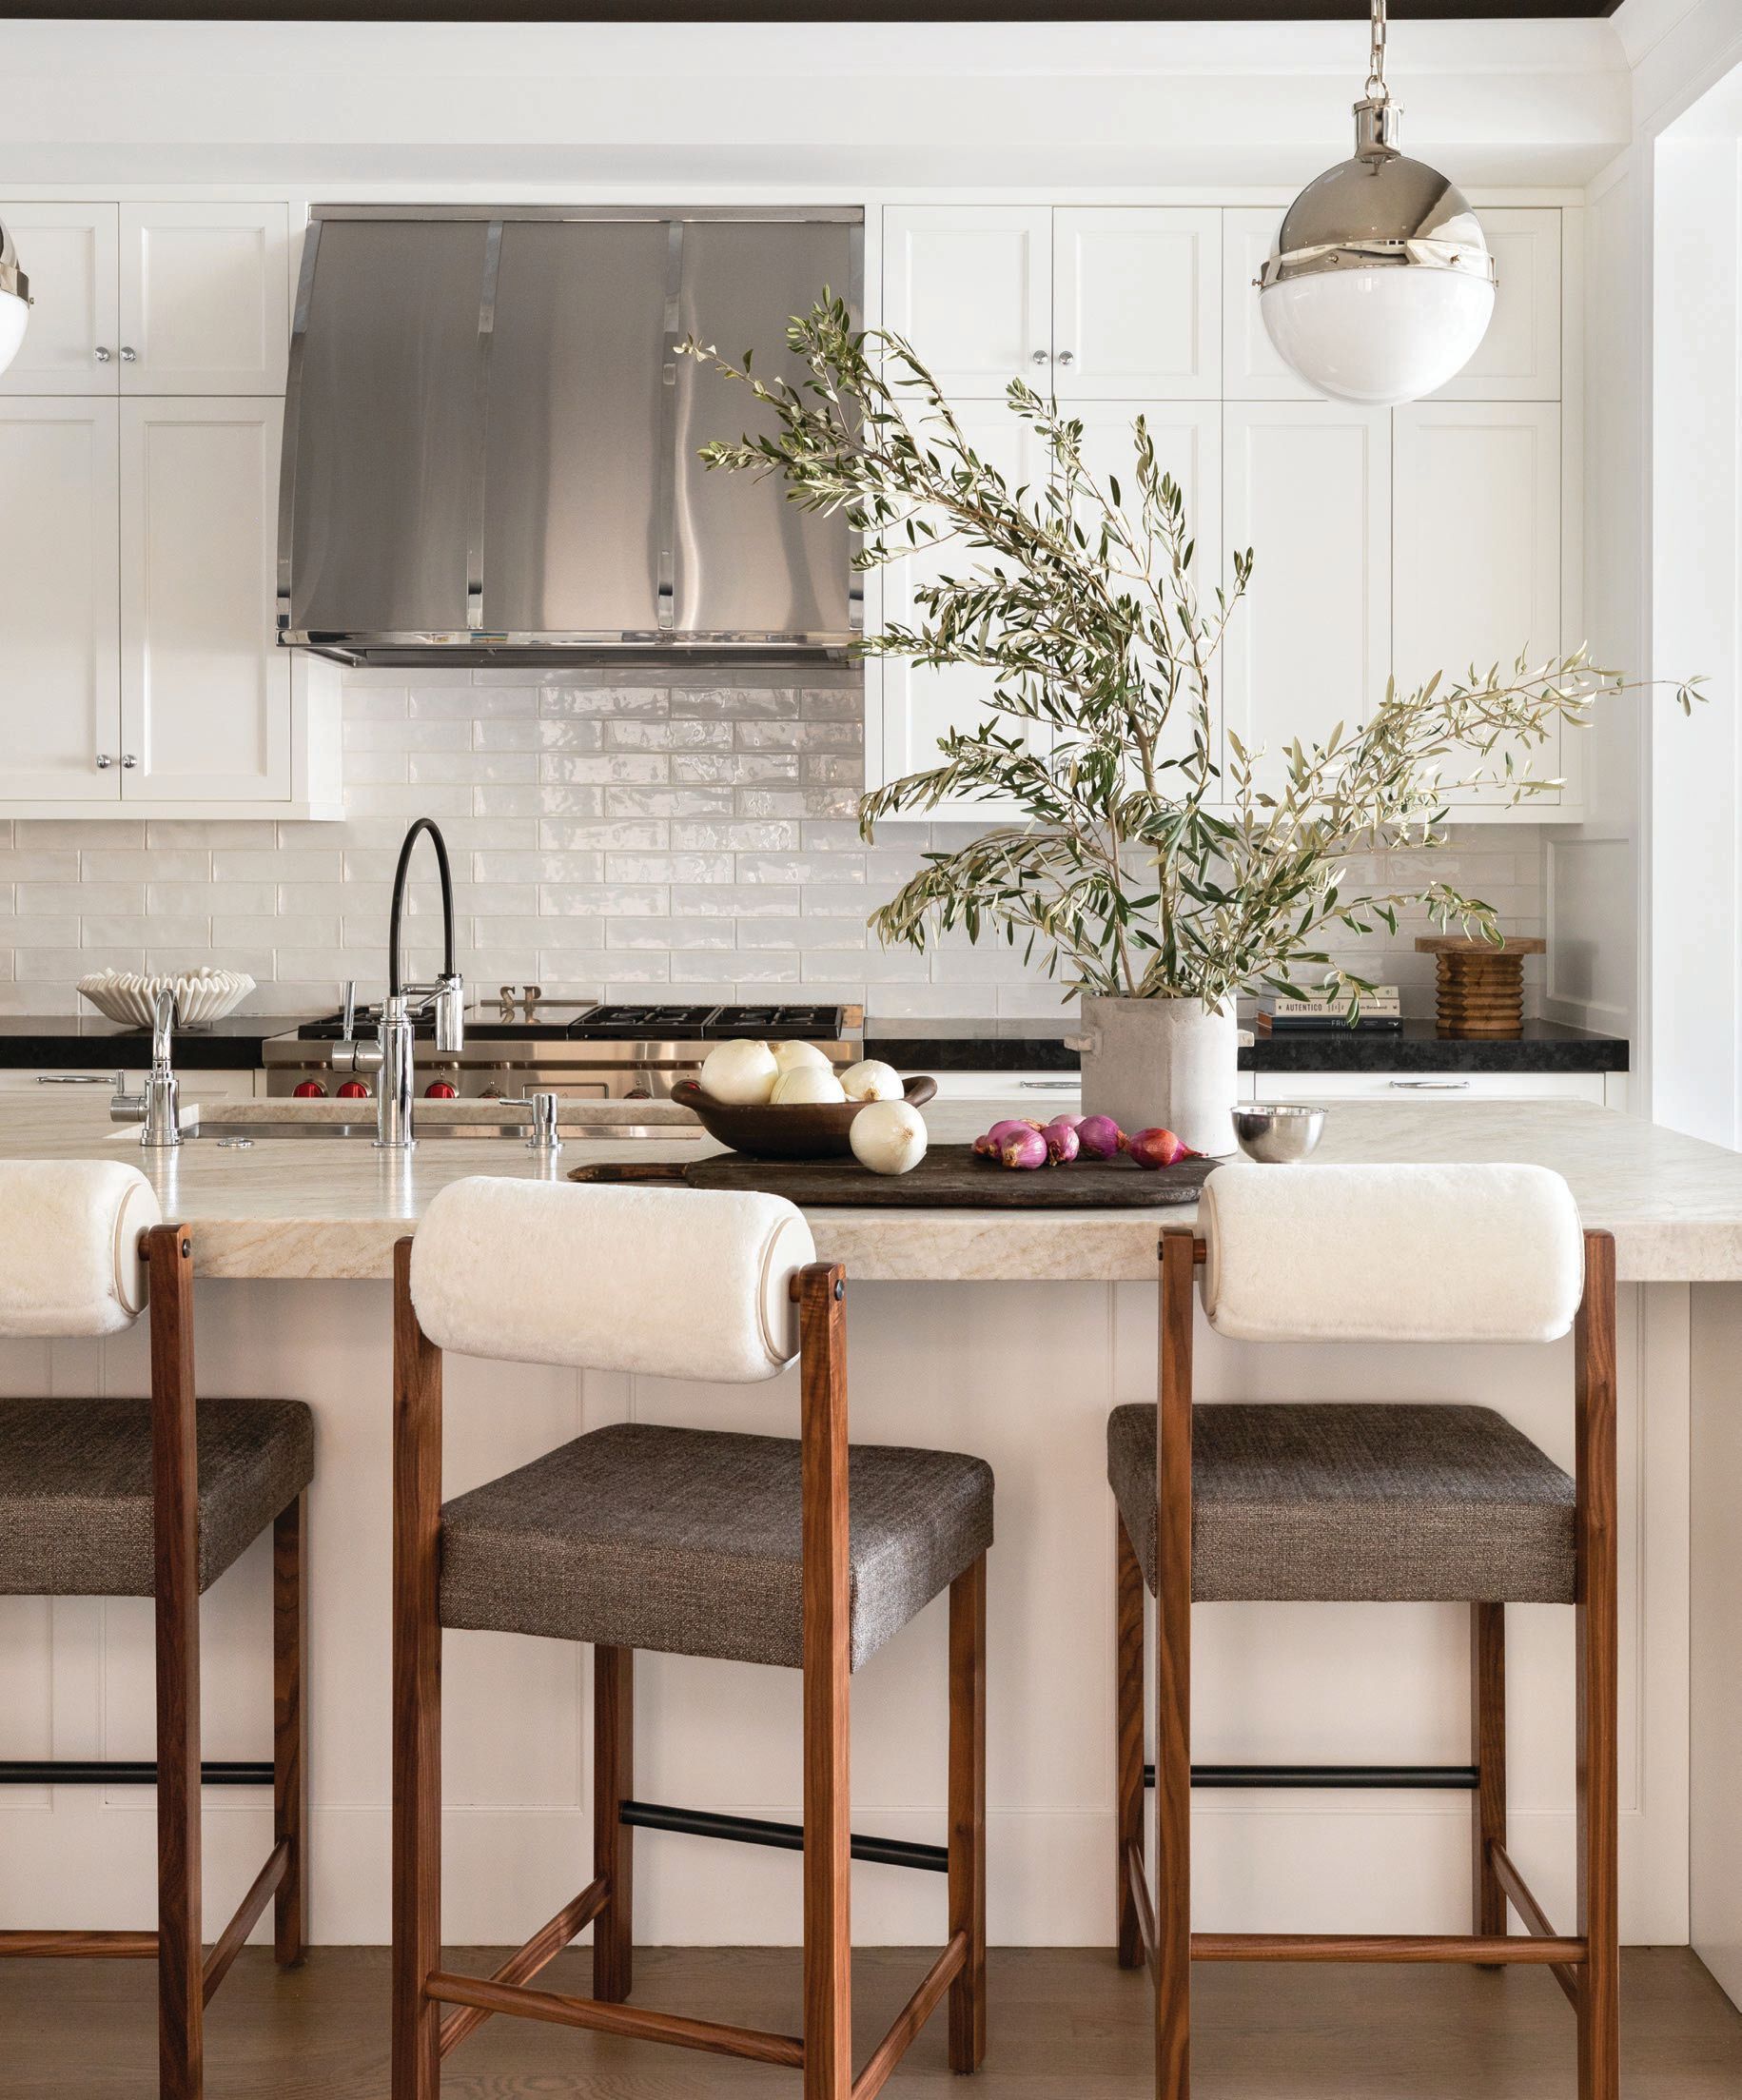 Inviting counter stools by Thomas Hayes Studio add a soft touch to the sleek kitchen. Photographed by Aimée Mazzenga